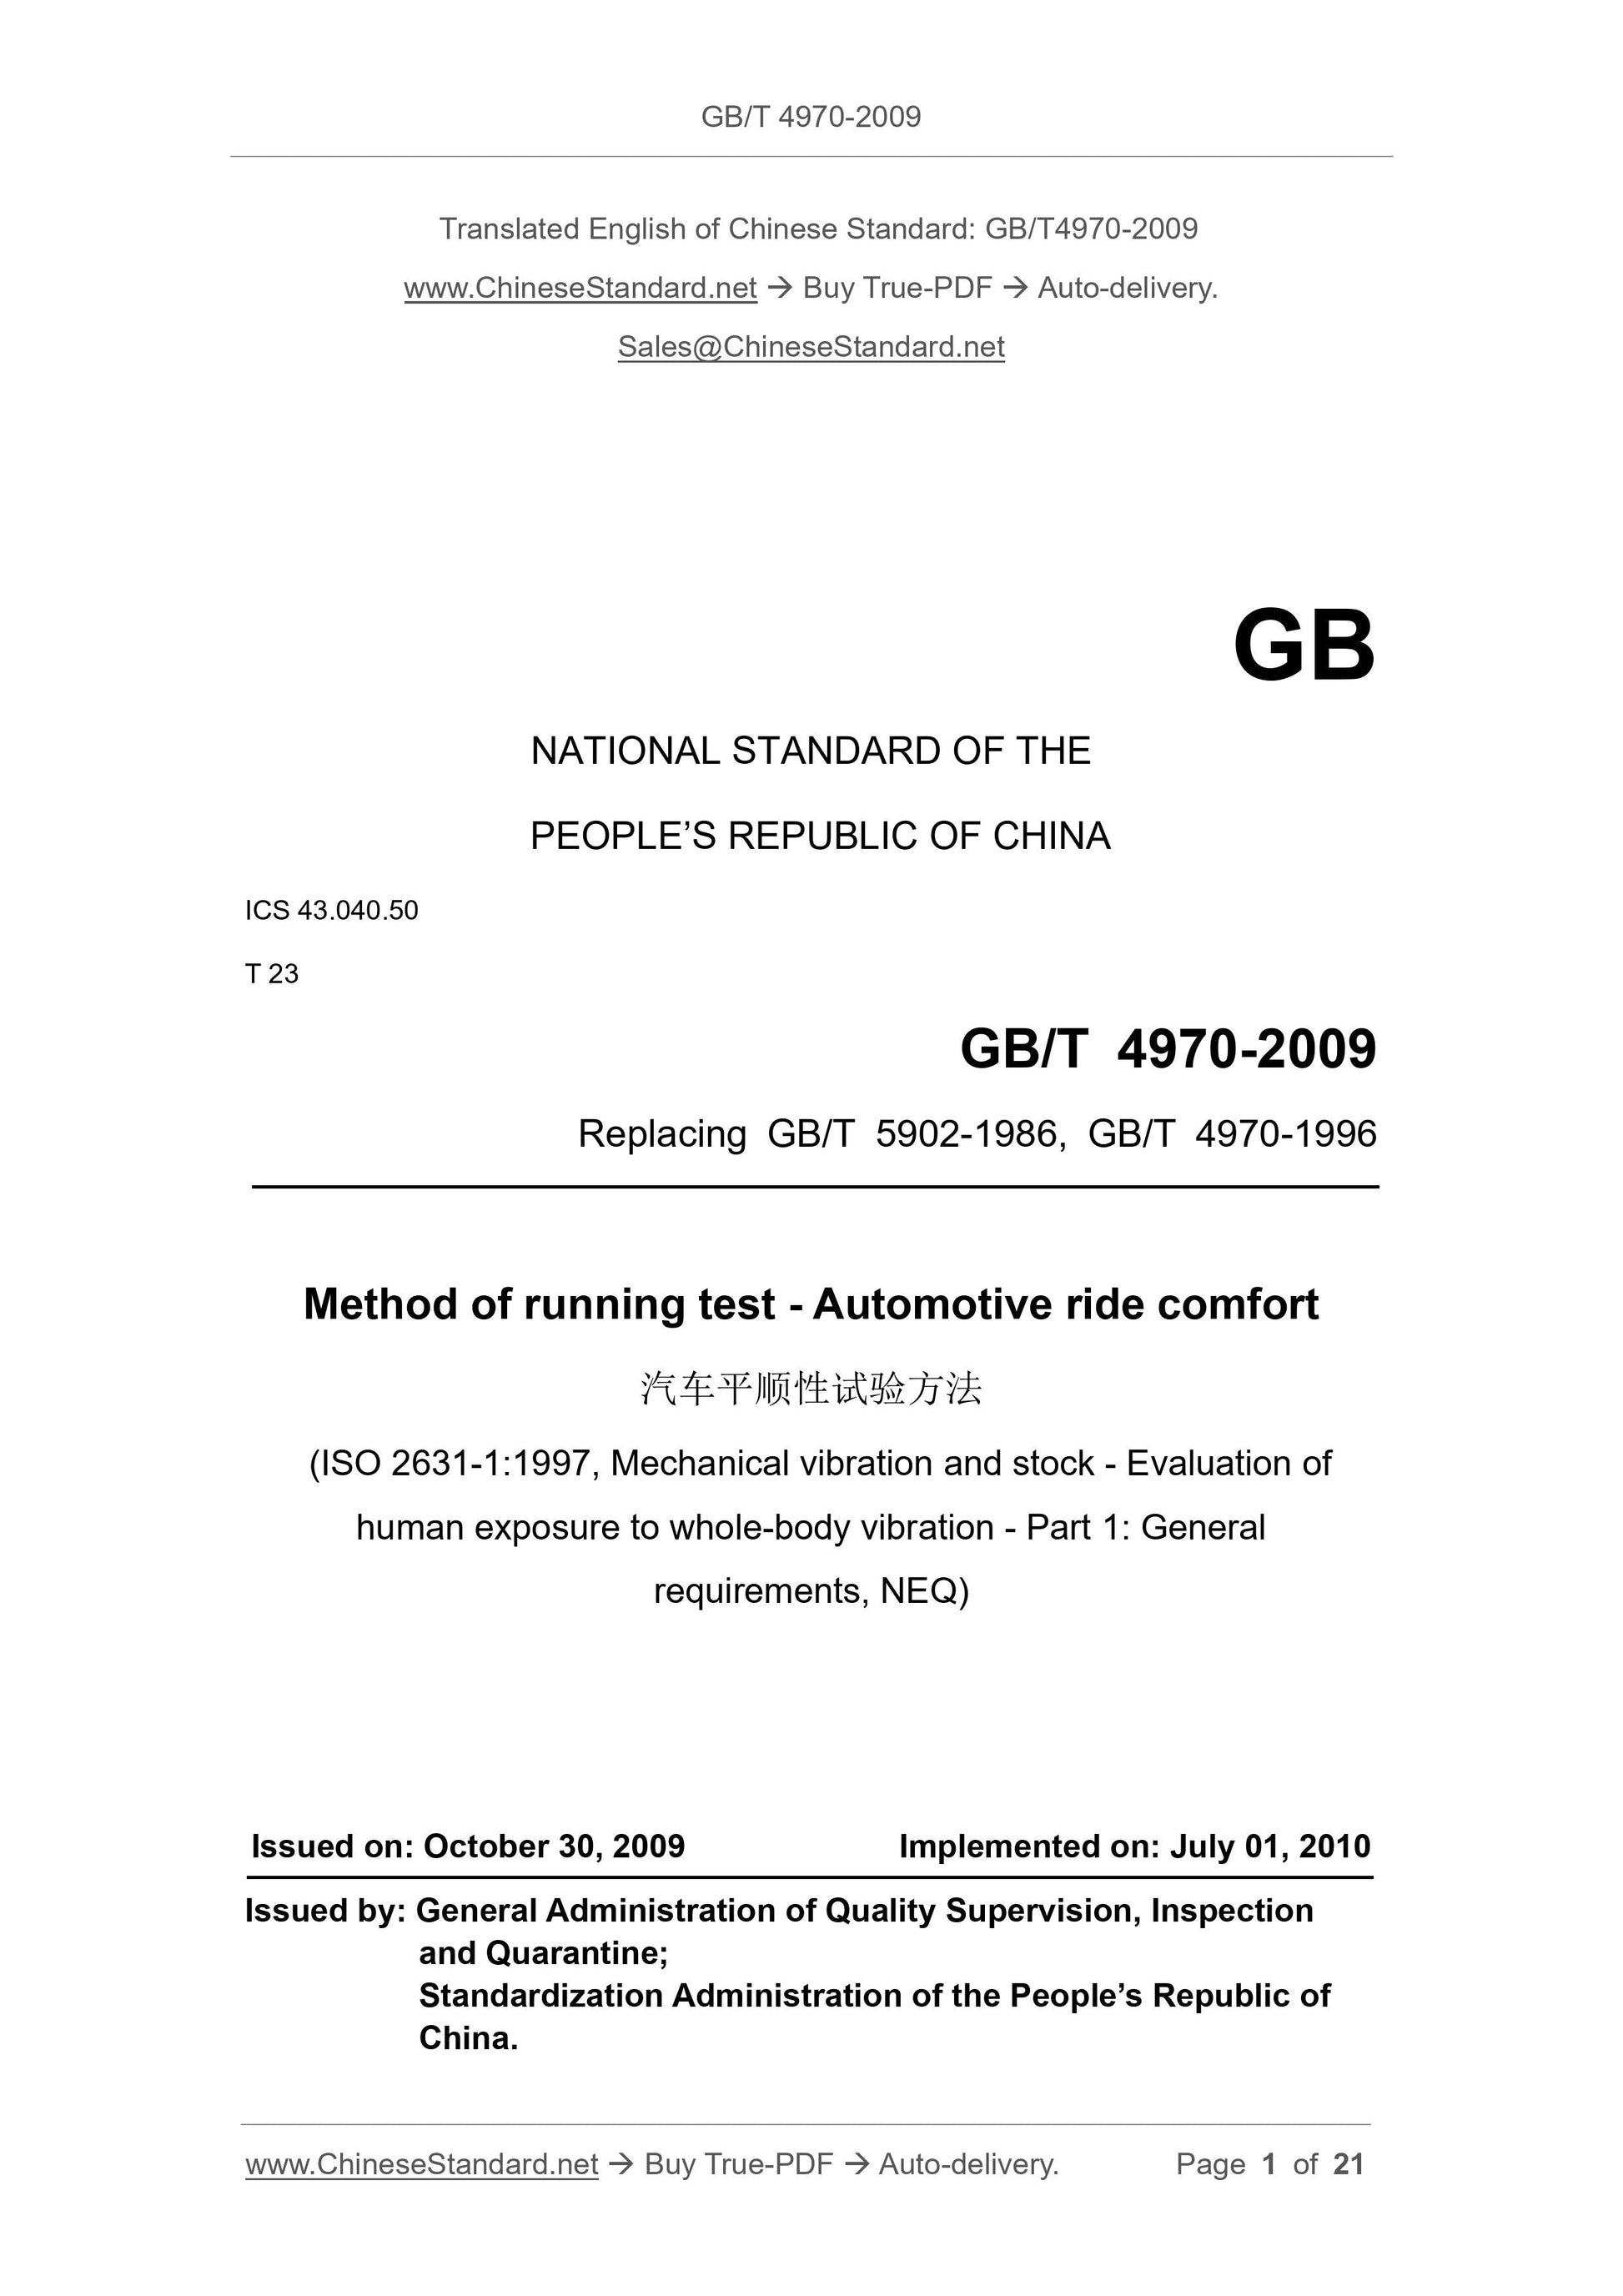 GB/T 4970-2009 Page 1